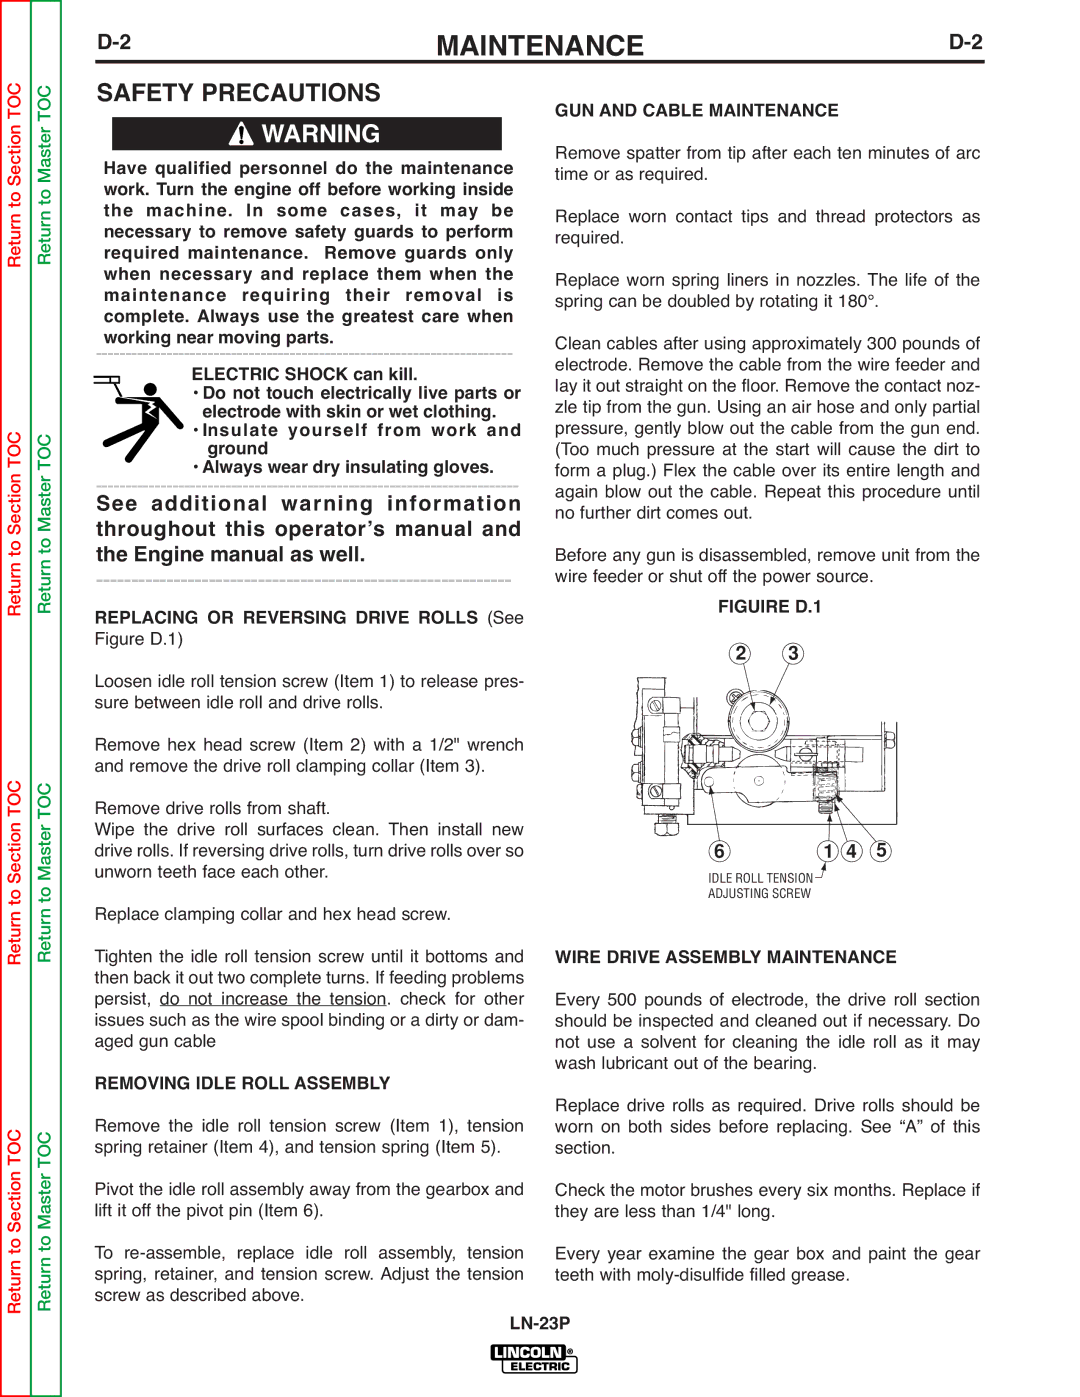 Lincoln Electric SVM176-A service manual GUN and Cable Maintenance, Figuire D.1, Wire Drive Assembly Maintenance 